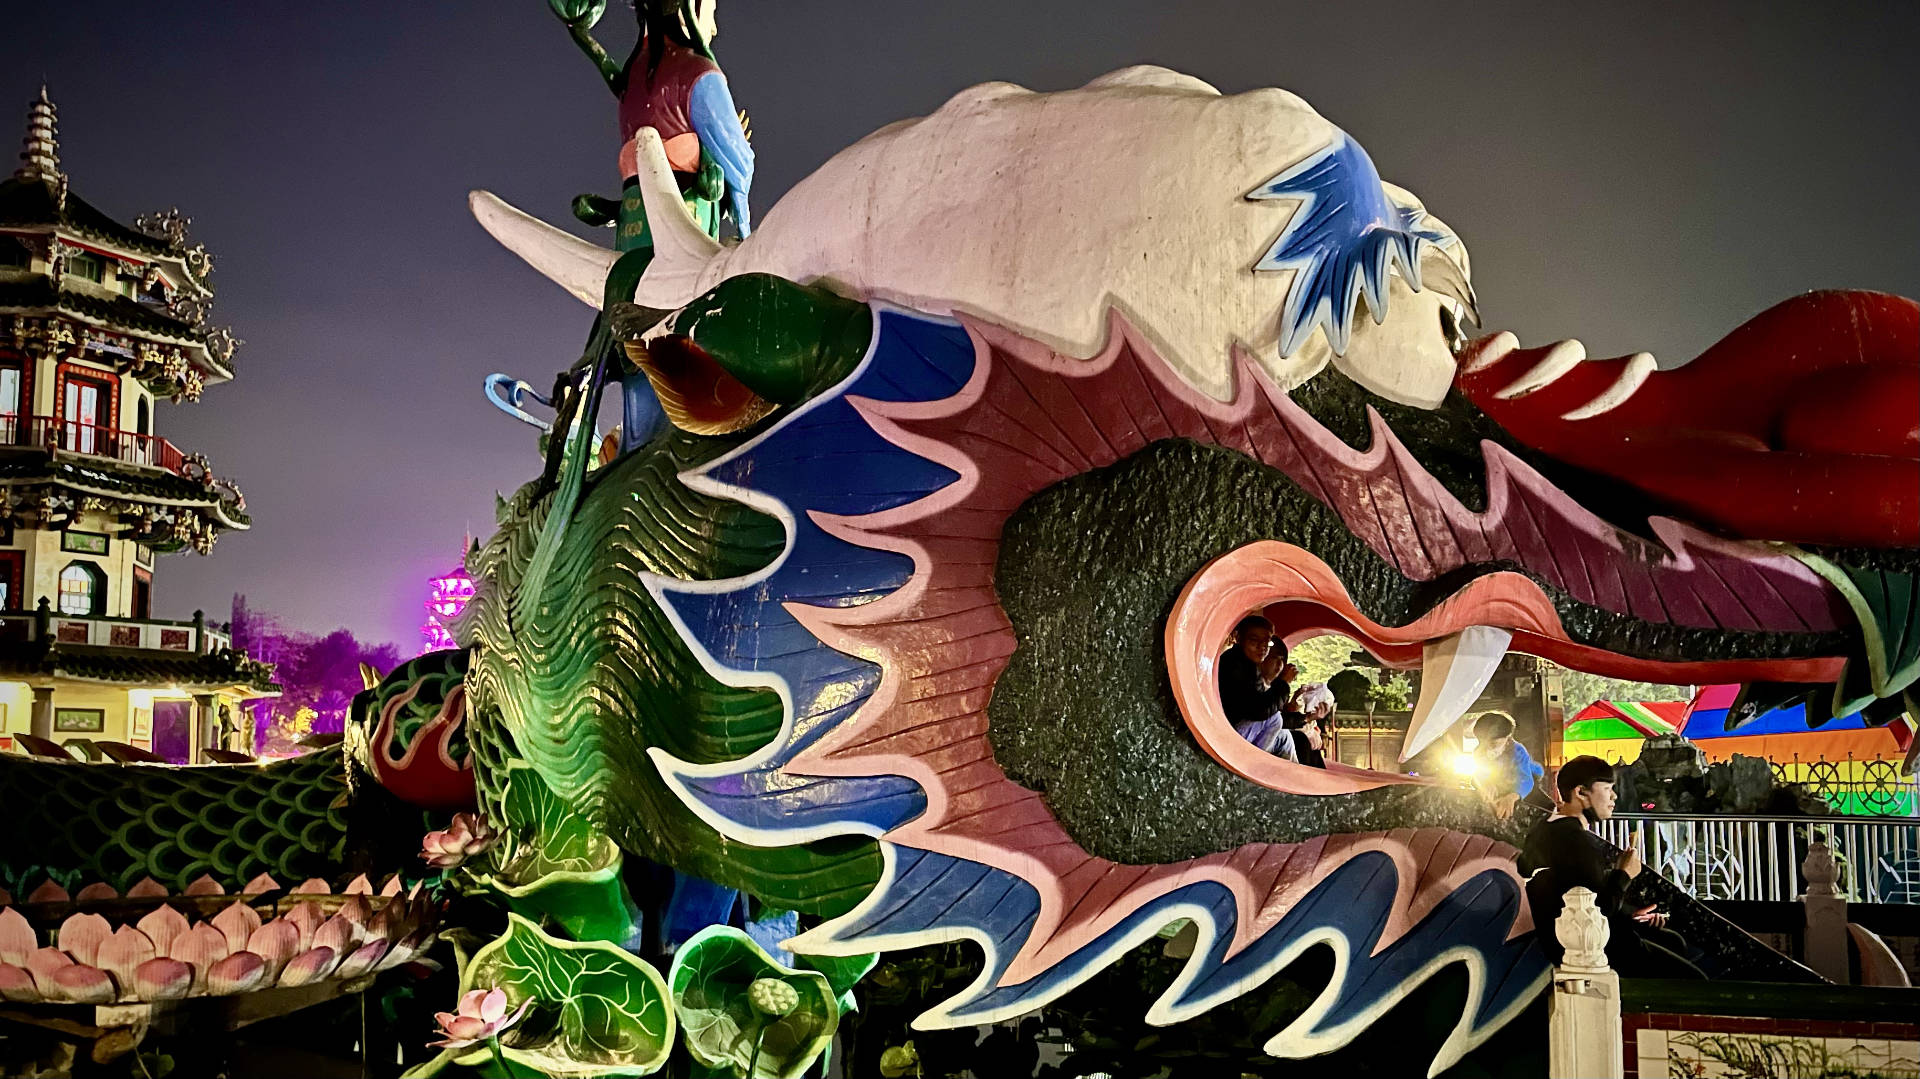 Two people sitting in the mouth of a dragon statue.